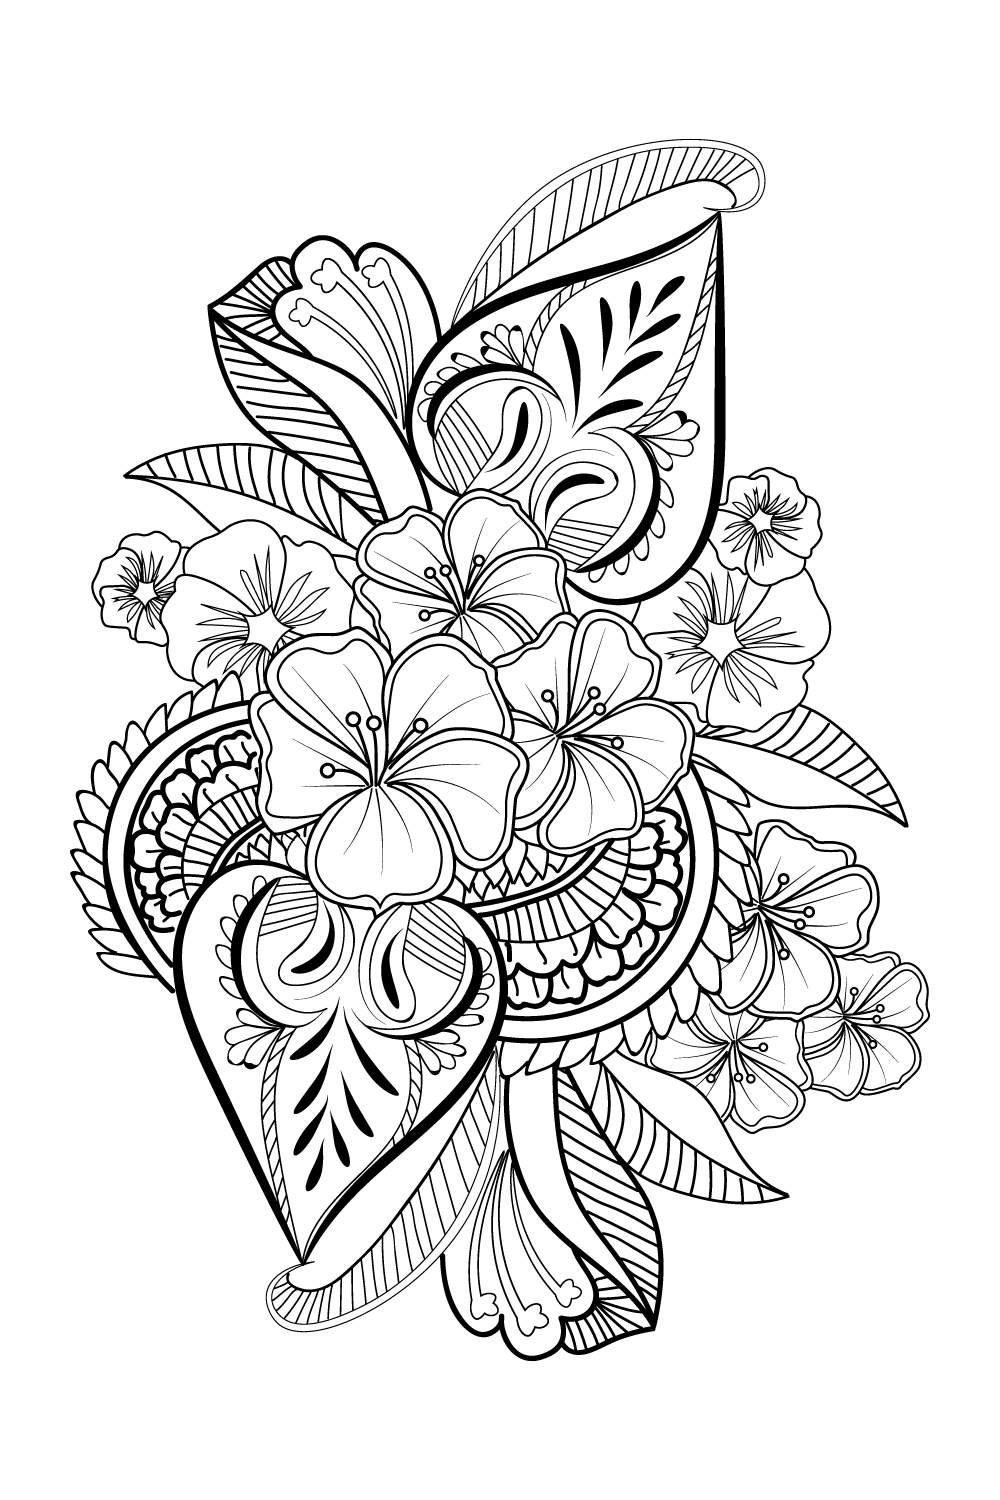 Disital illustration, outline pencil drawing, doodle flower zentangle desing, decorative henna tattoo design tattoo sketch, floral tattoo drawing pinterest preview image.